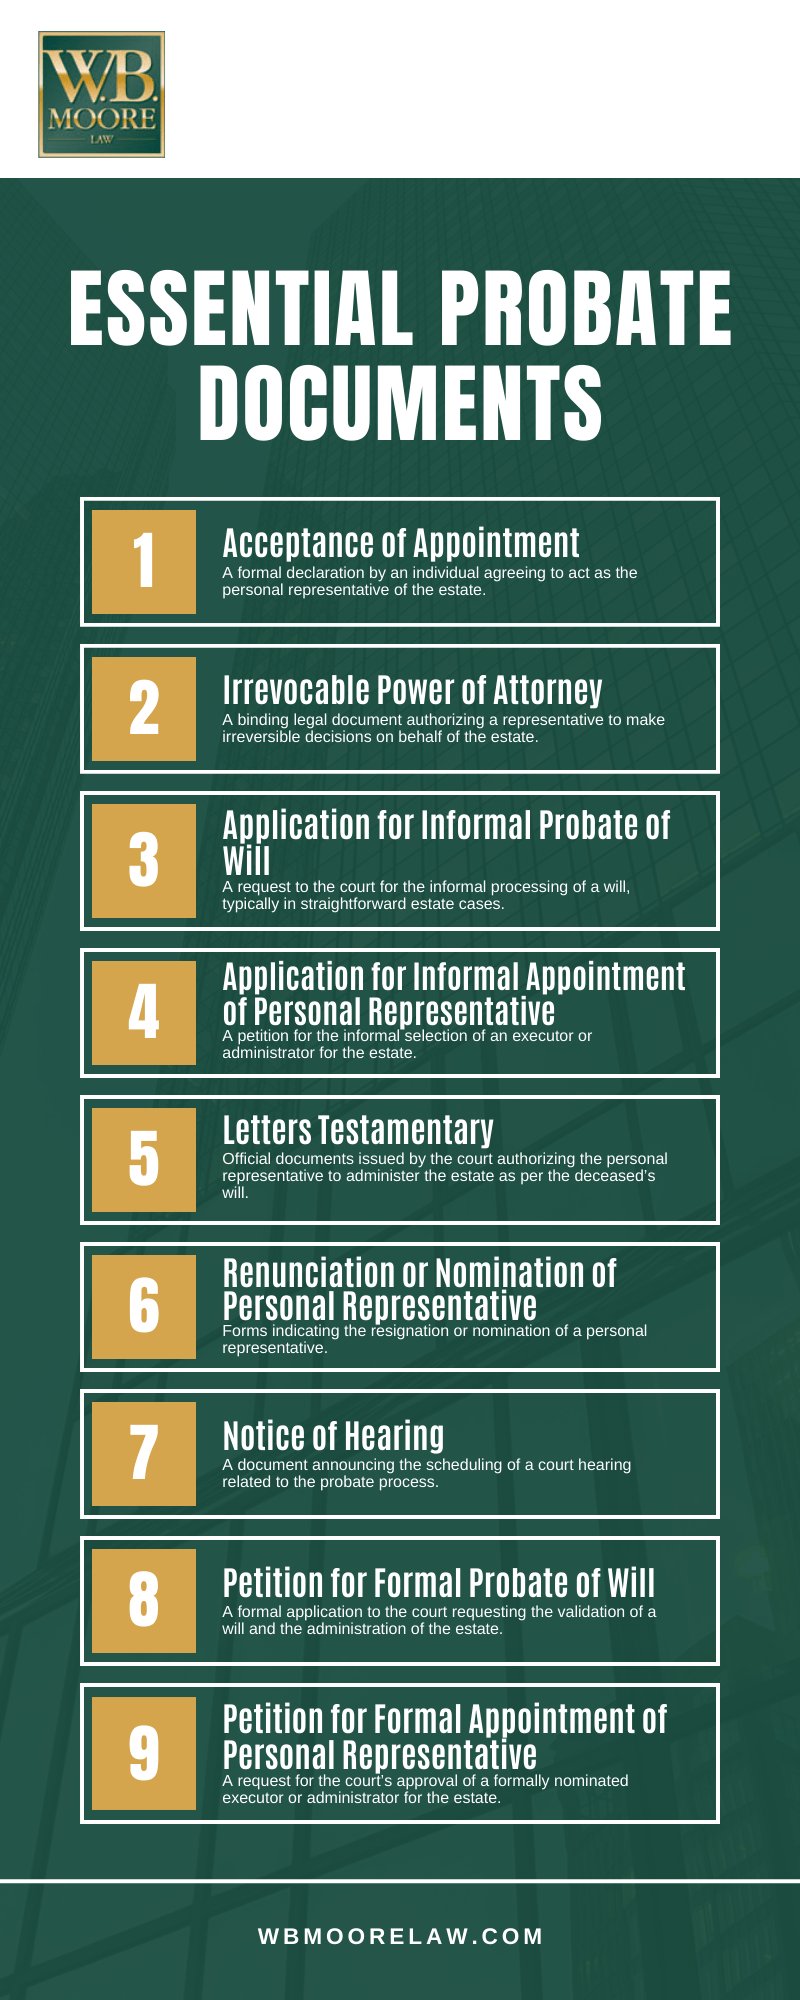 Essential Probate Documents Infographic